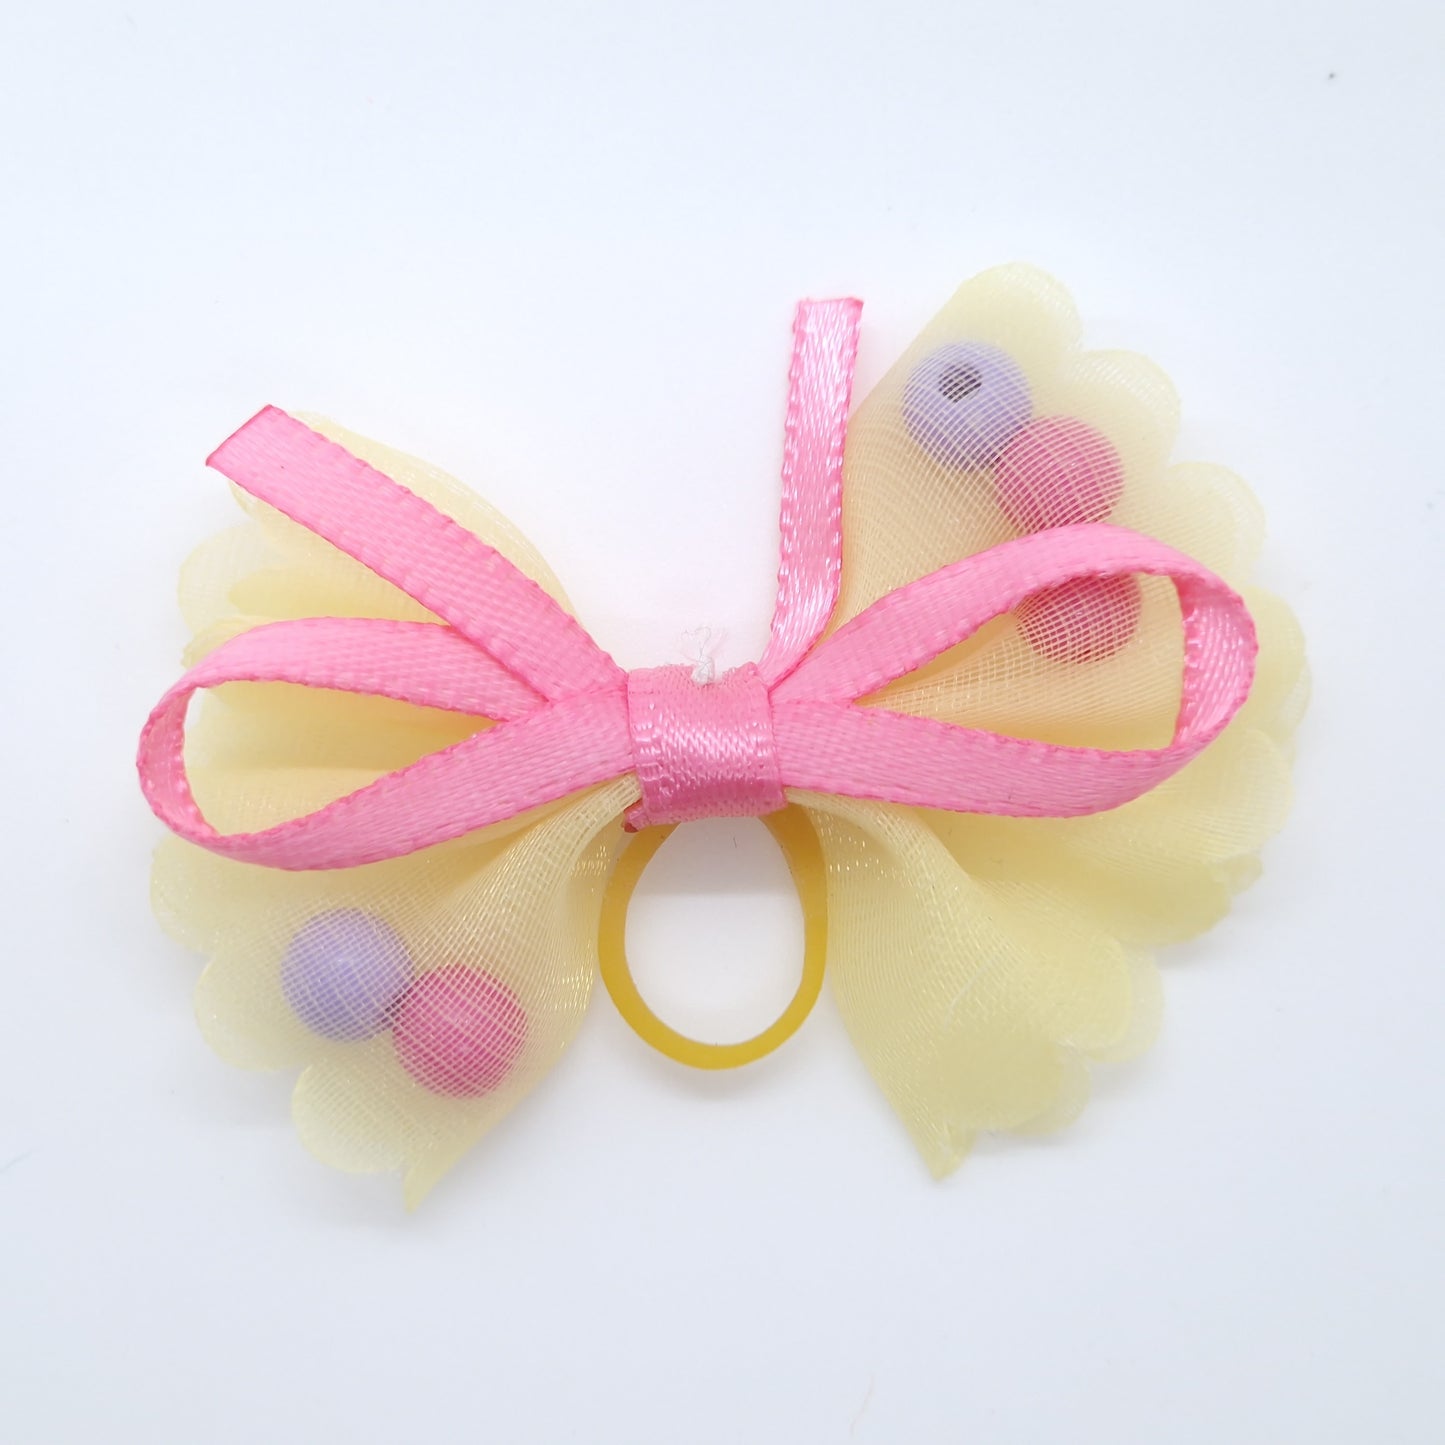 Soft Netted Bow on Elastic Band